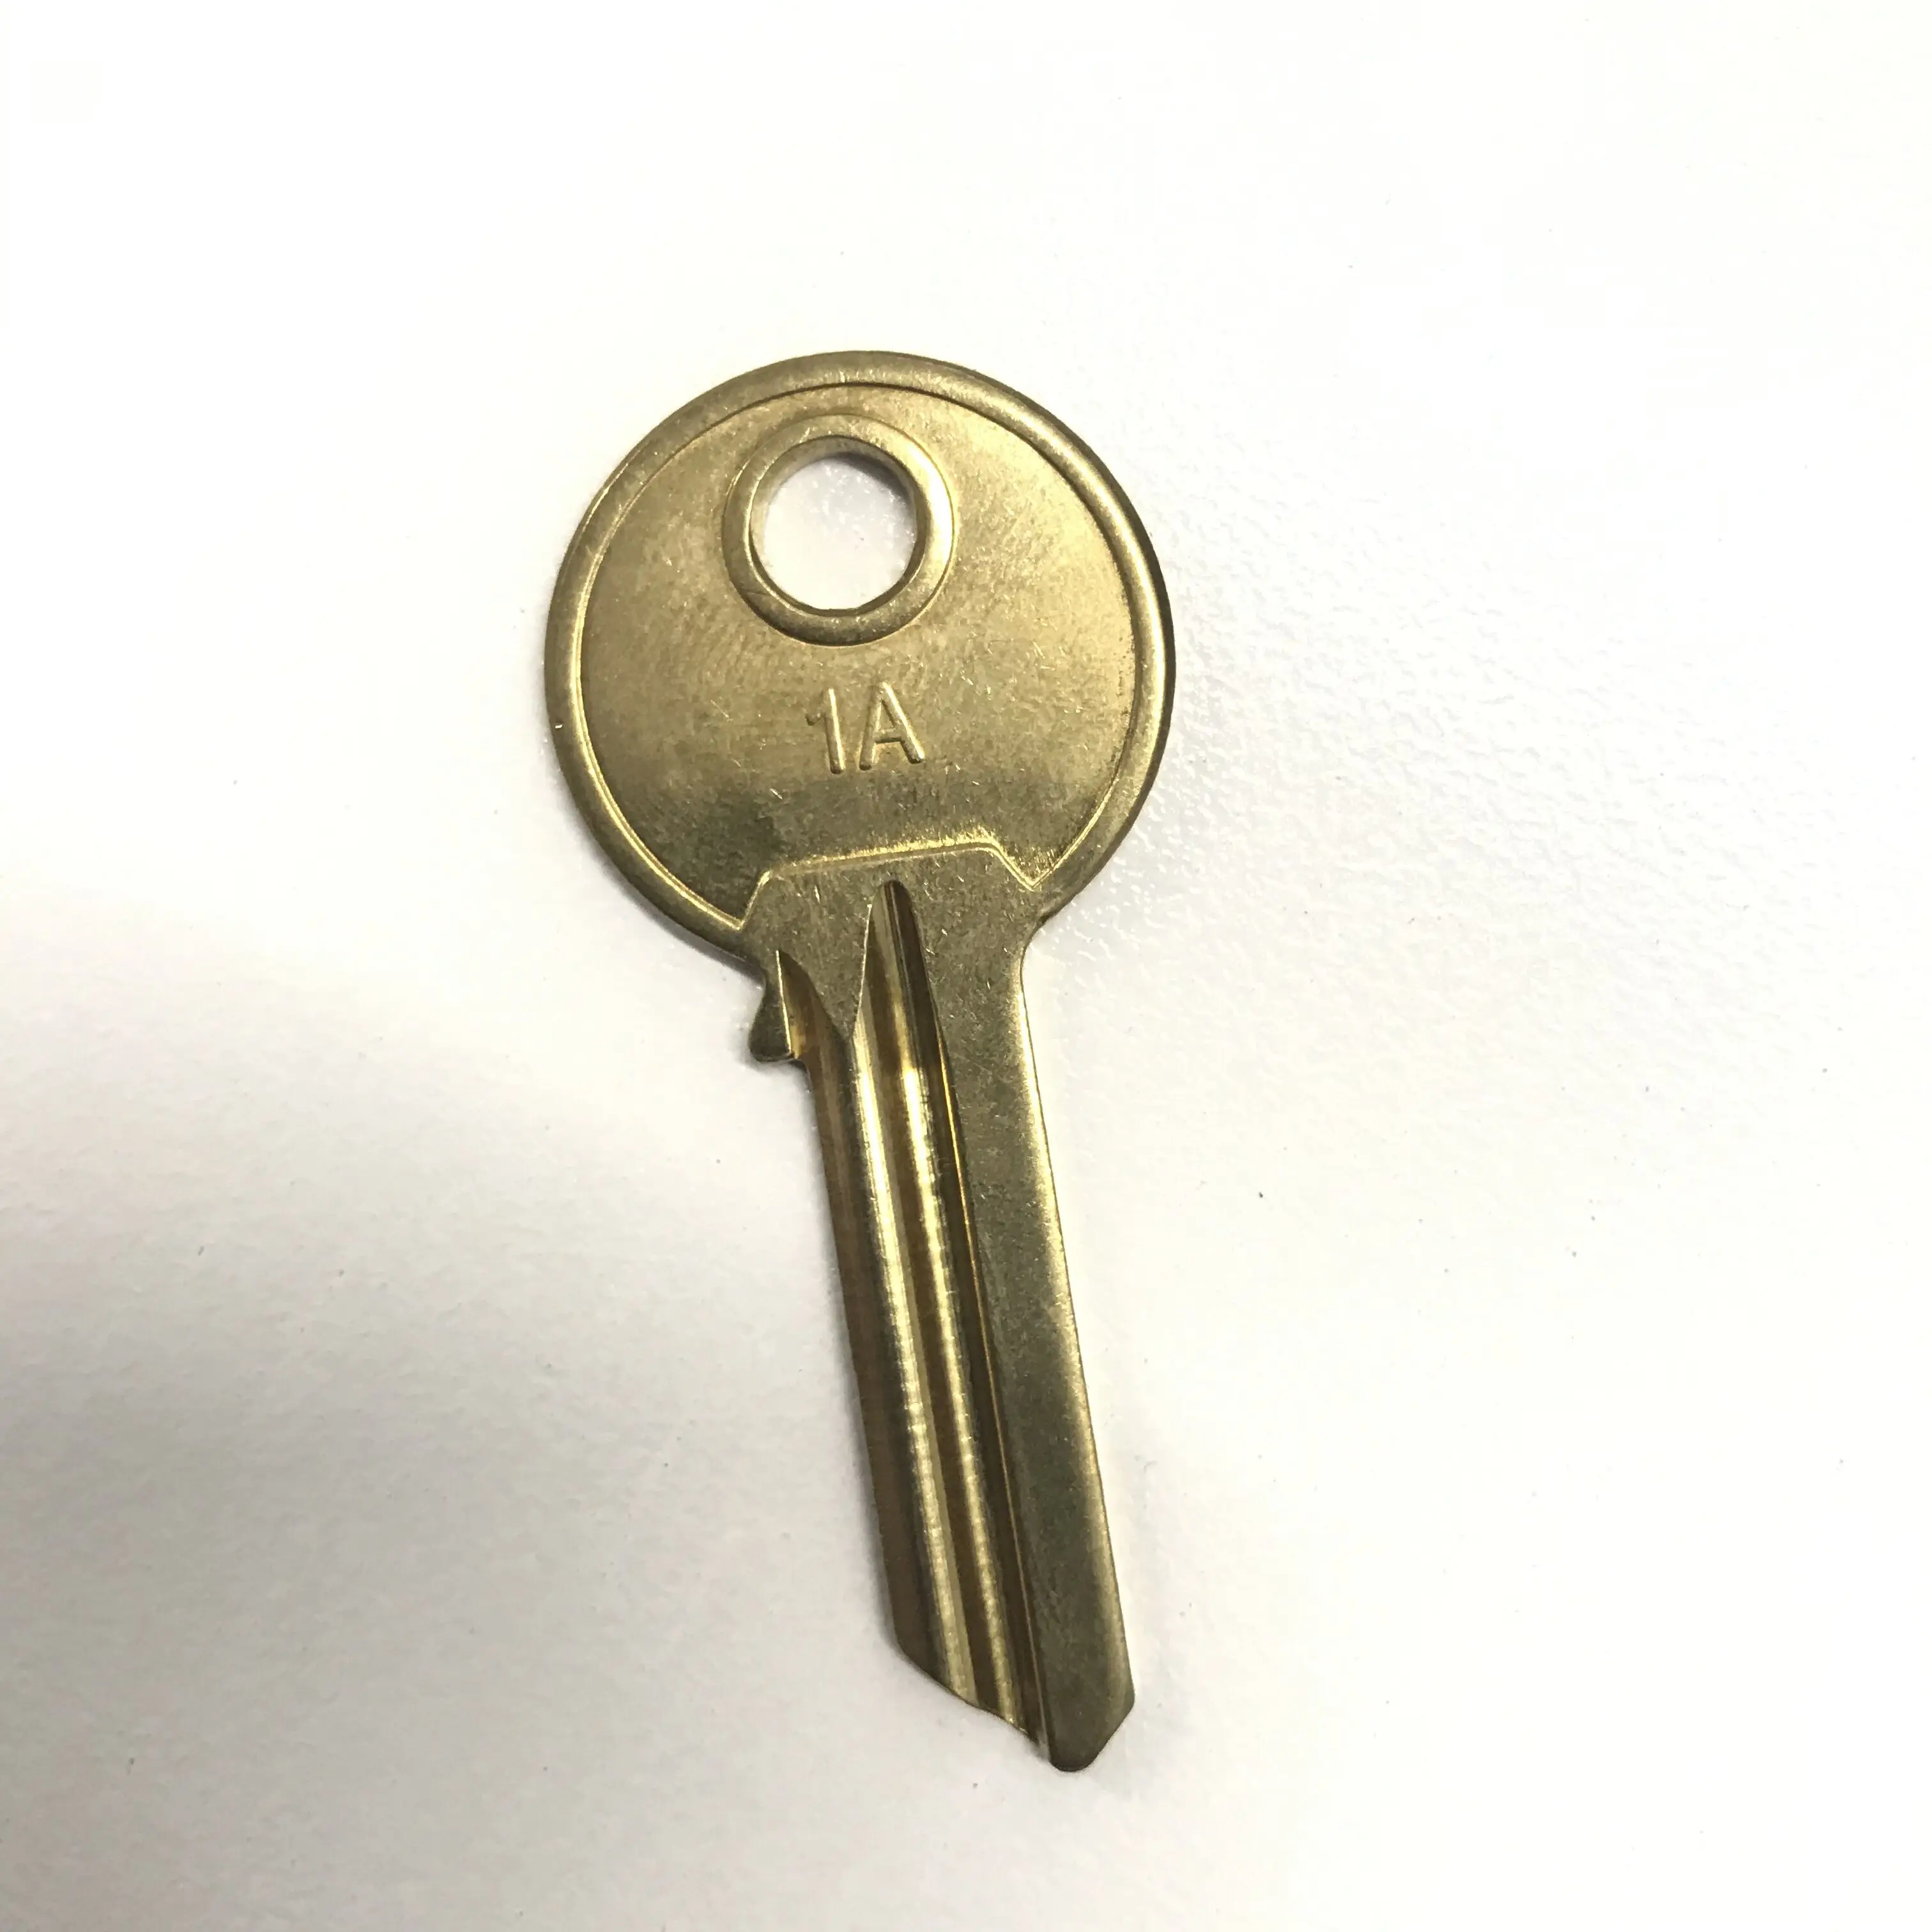 

Locksmiths tools key blank 1A brass key for household factory price and free shipping, Shown